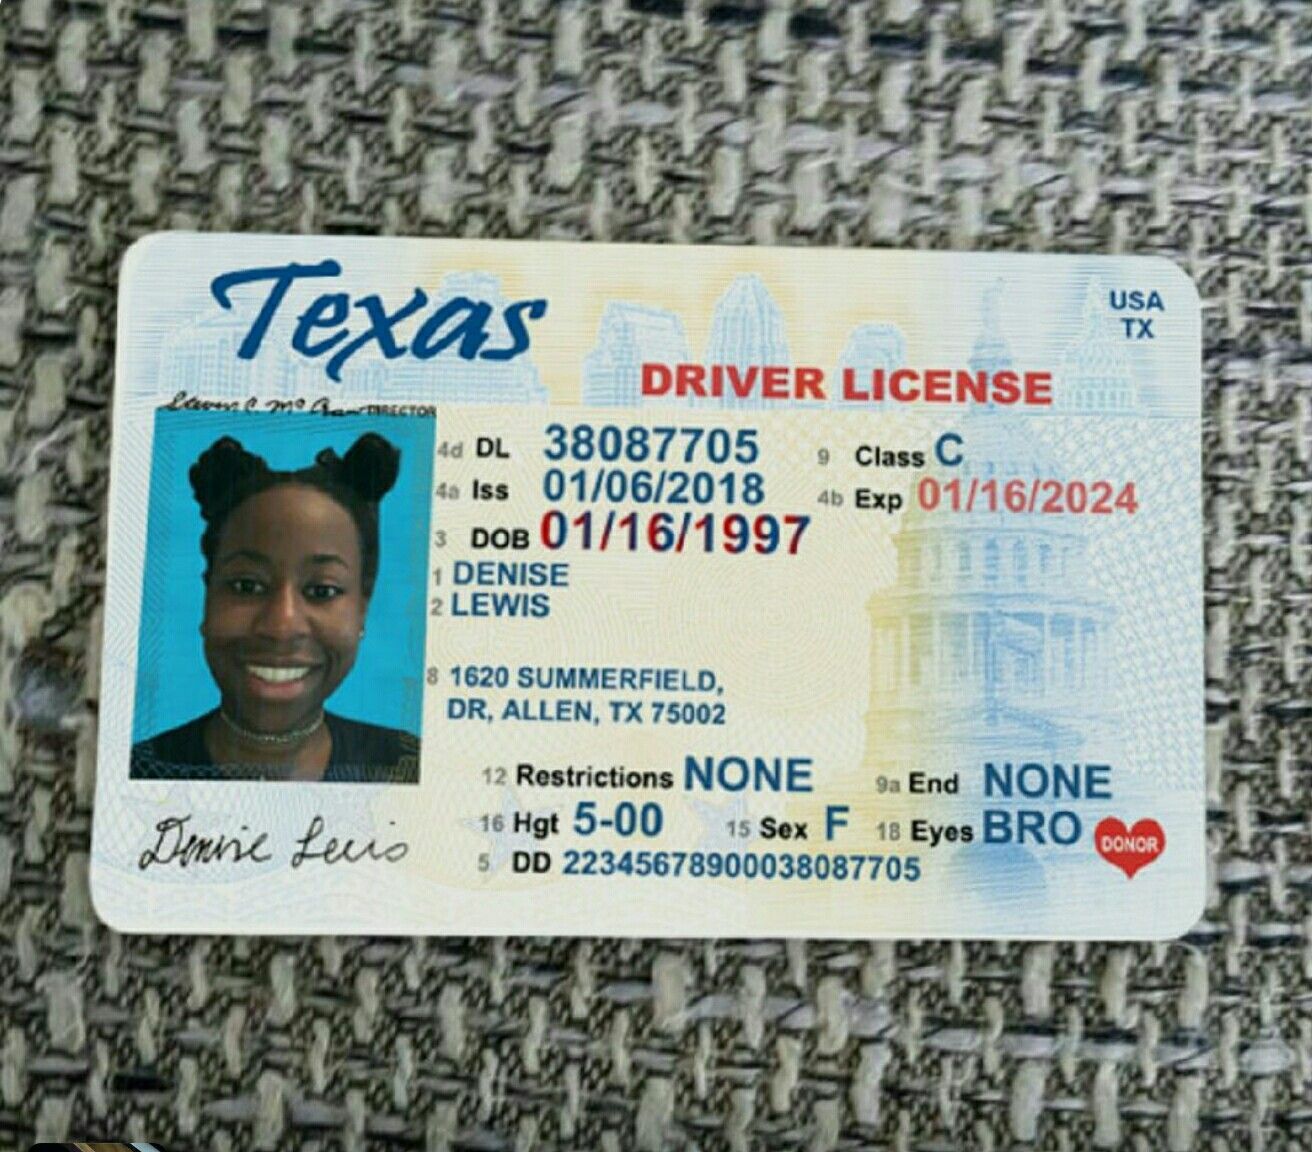 USA REAL DOCUMENTS: Driver License 2 SIDES + SELFIE + SSN - Working ID